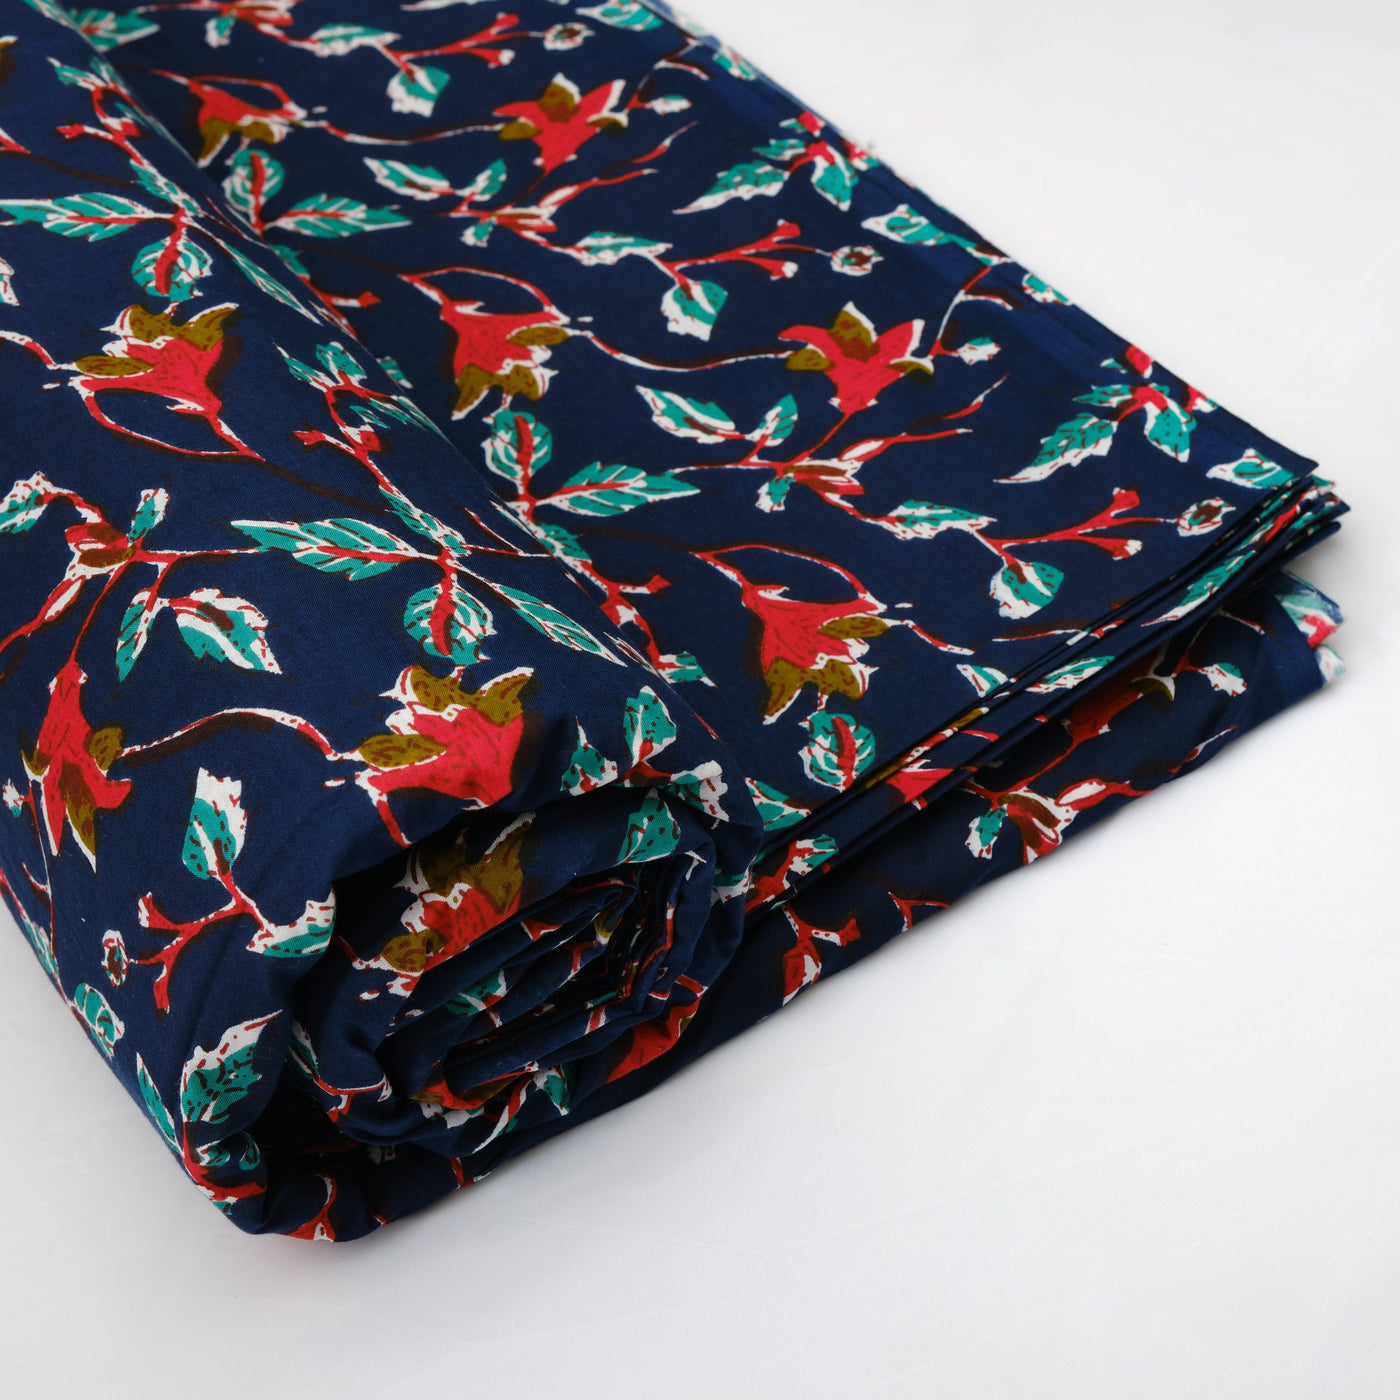 Dark Blue, Vermillion Red, Pine Green Indian Floral Printed Pure Cotton Cloth, Fabric by the yard, Curtains Pillow Covers Duvet Cover Dress